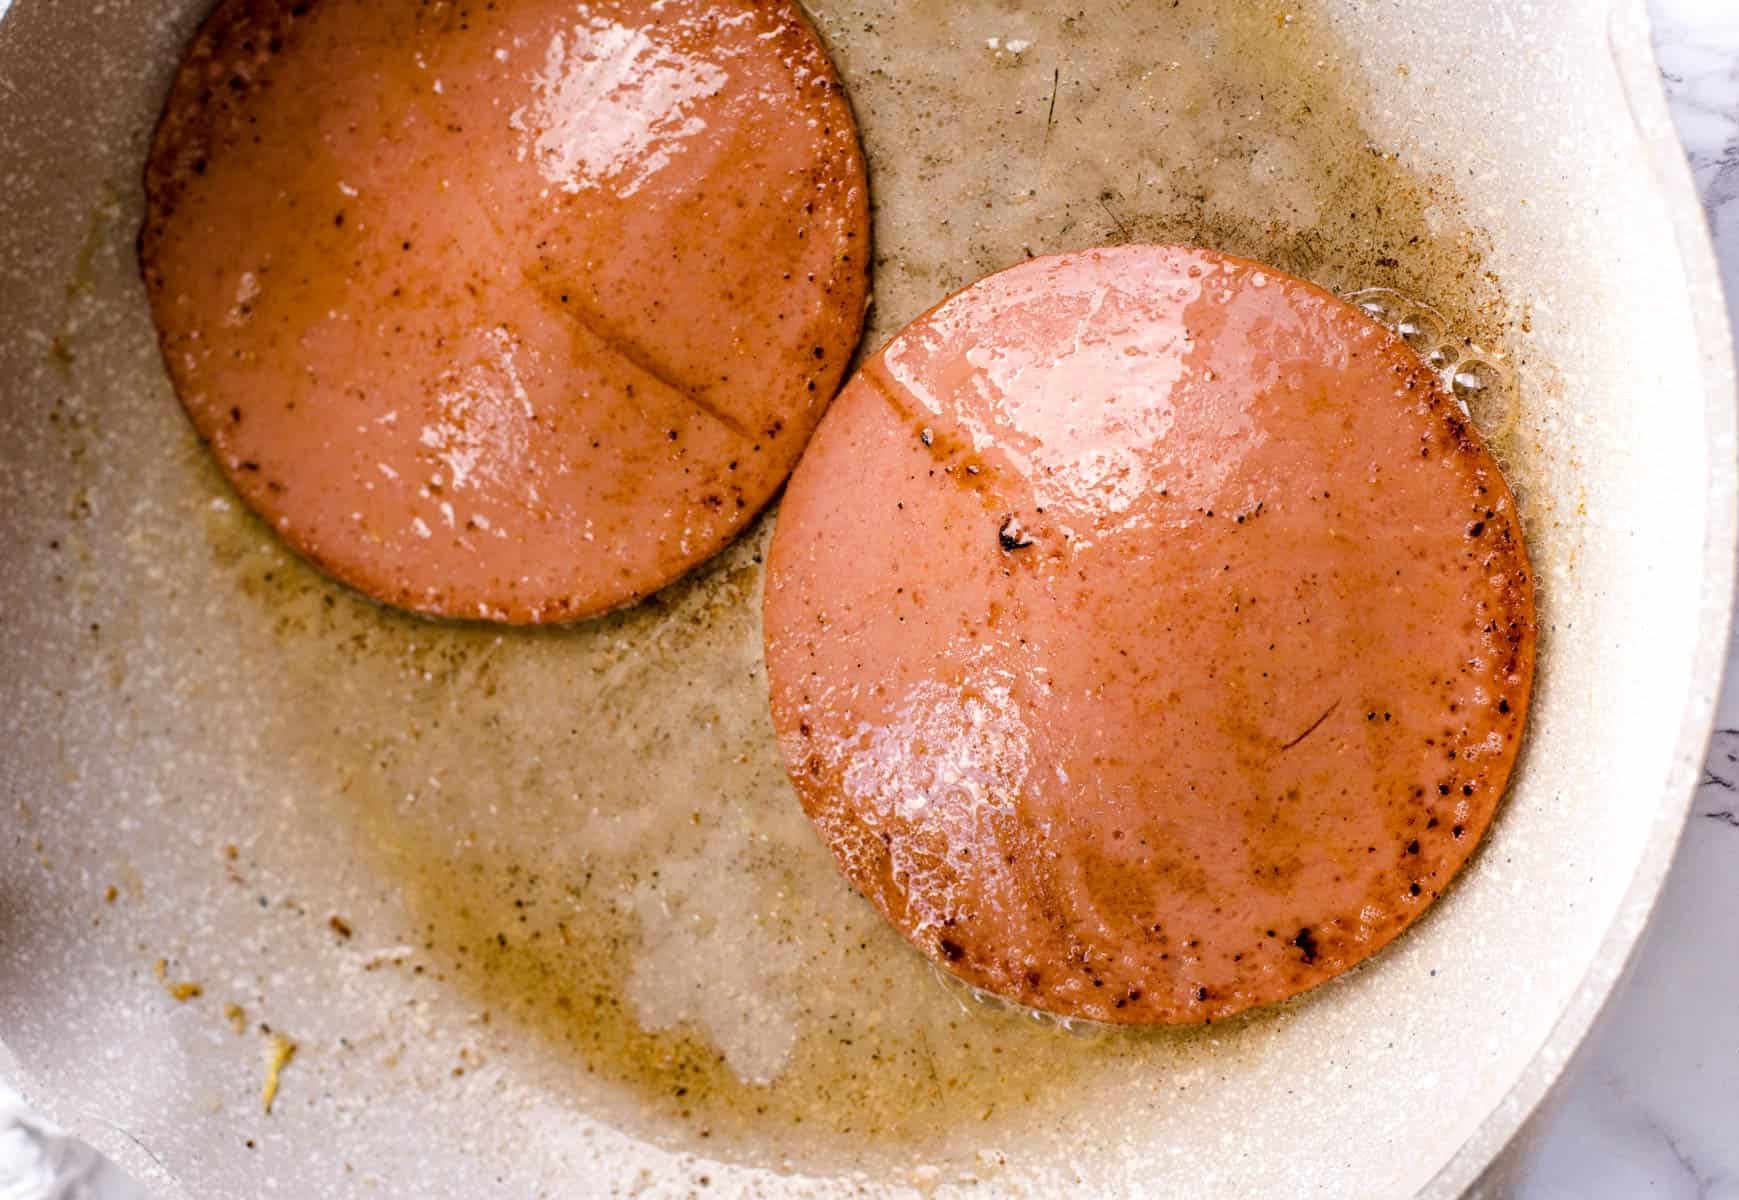 What Temp To Fry Bologna On Electric Skillet